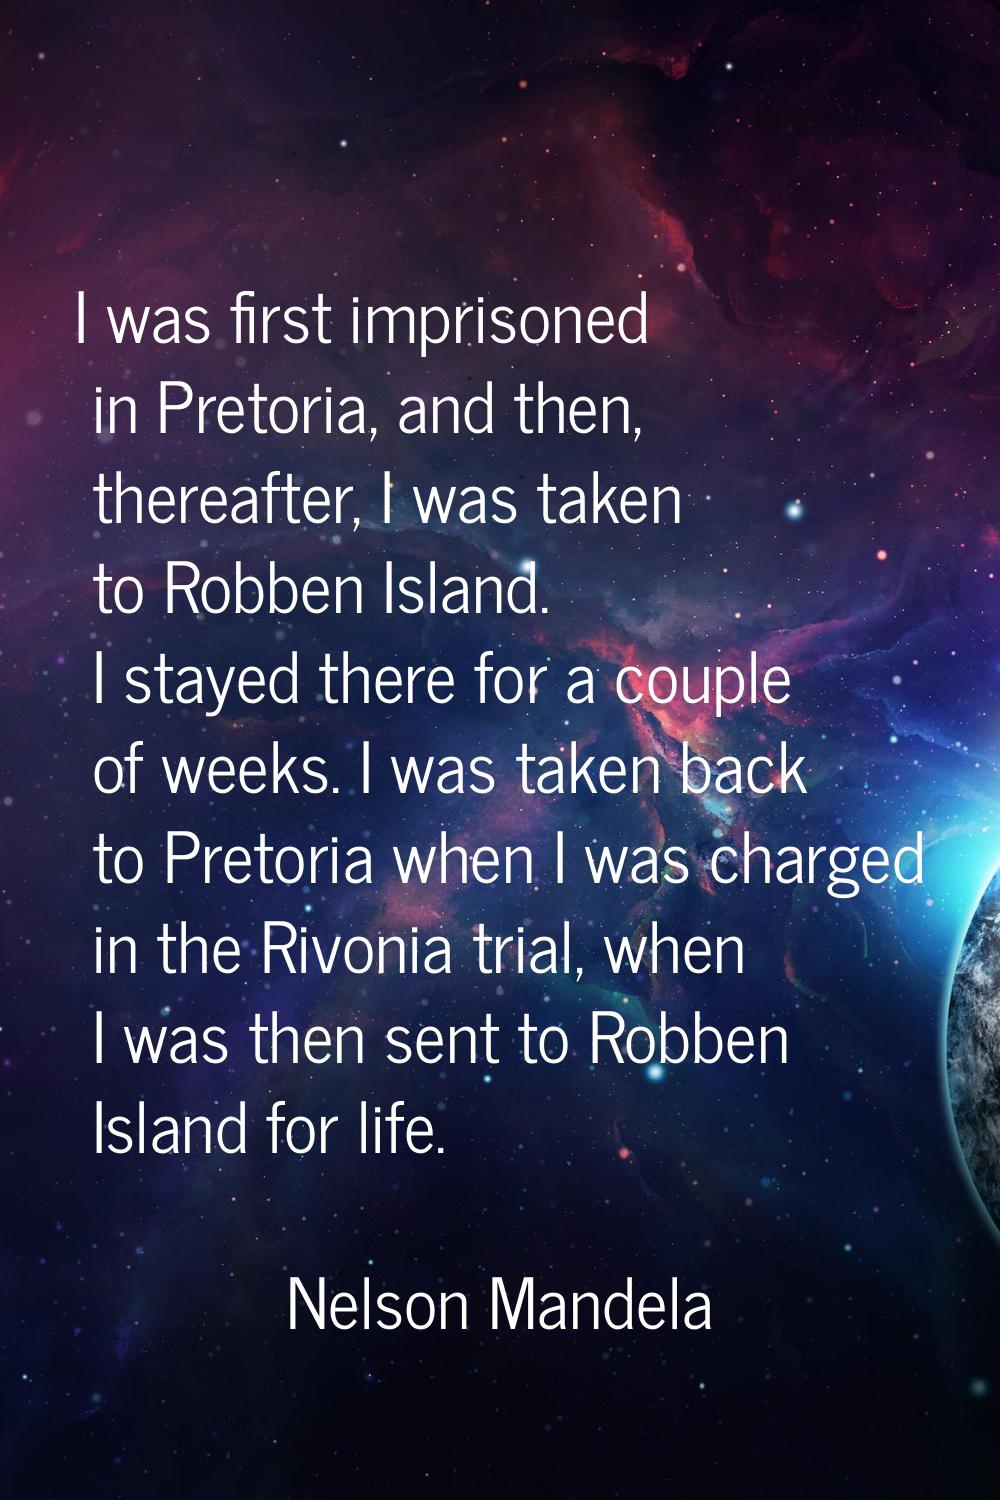 I was first imprisoned in Pretoria, and then, thereafter, I was taken to Robben Island. I stayed th